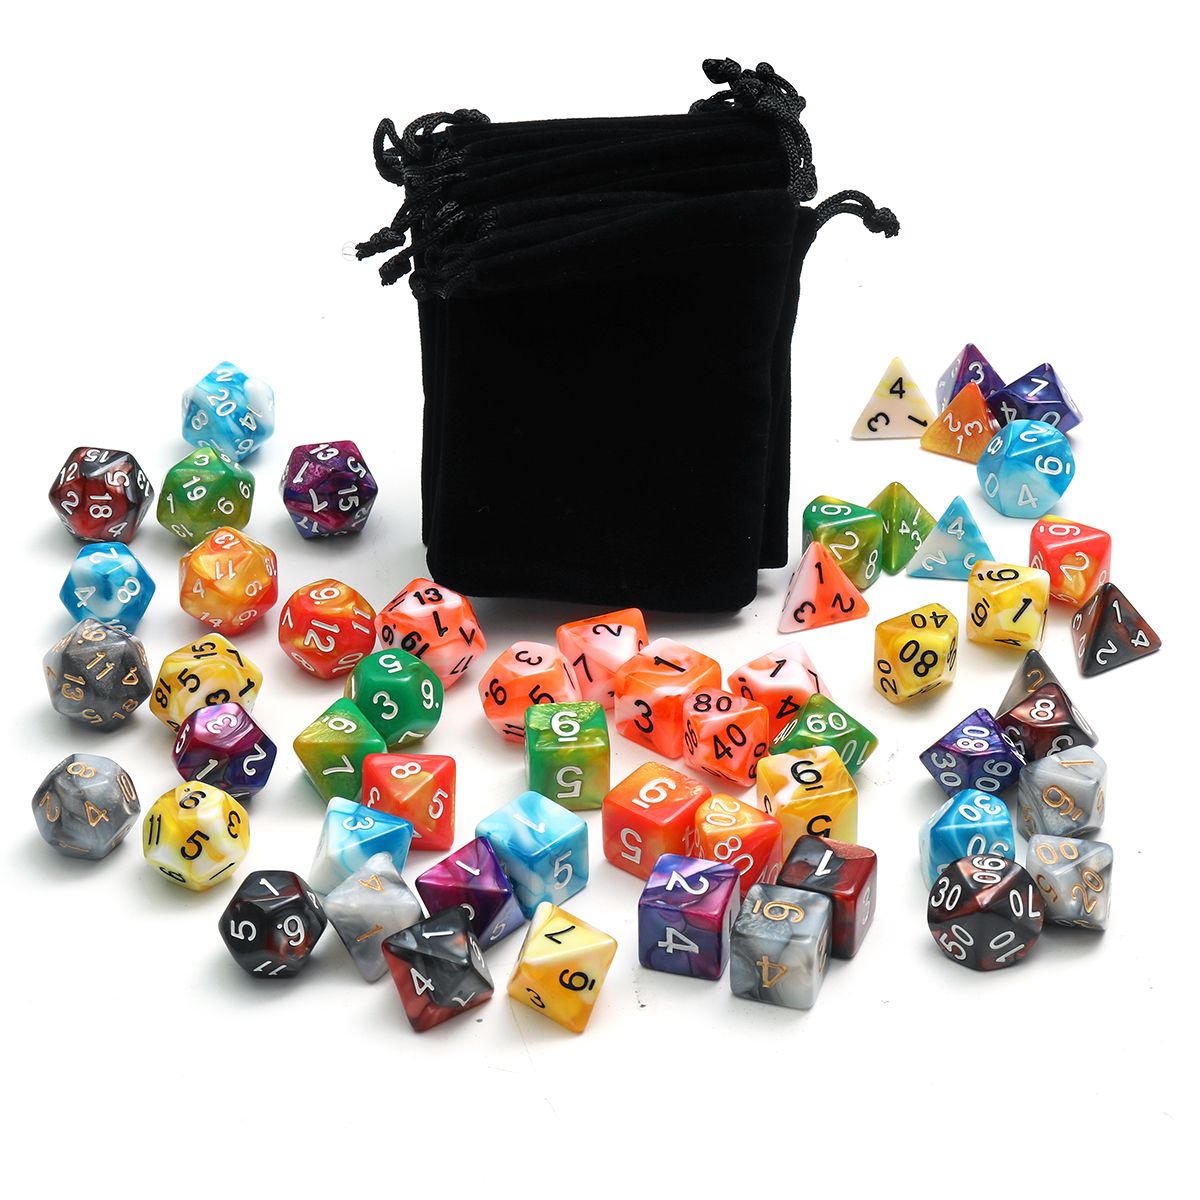 495670Pcs-Polyhedral-Dices-for-Dungeons-amp-Dragons-Desktop-Games-With-Storage-Bags-1646830